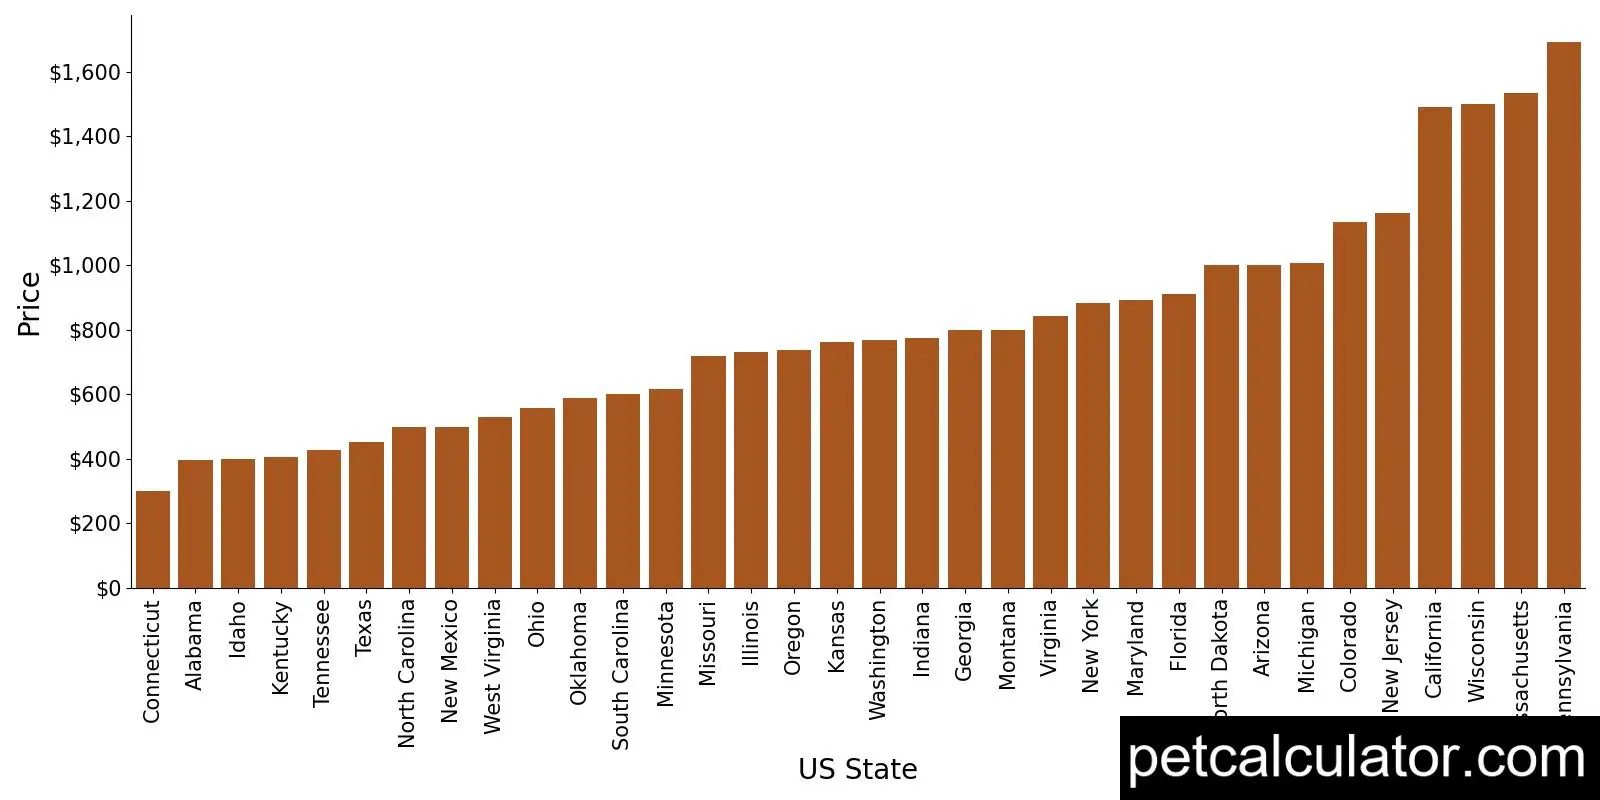 Price of Great Pyrenees by US State 